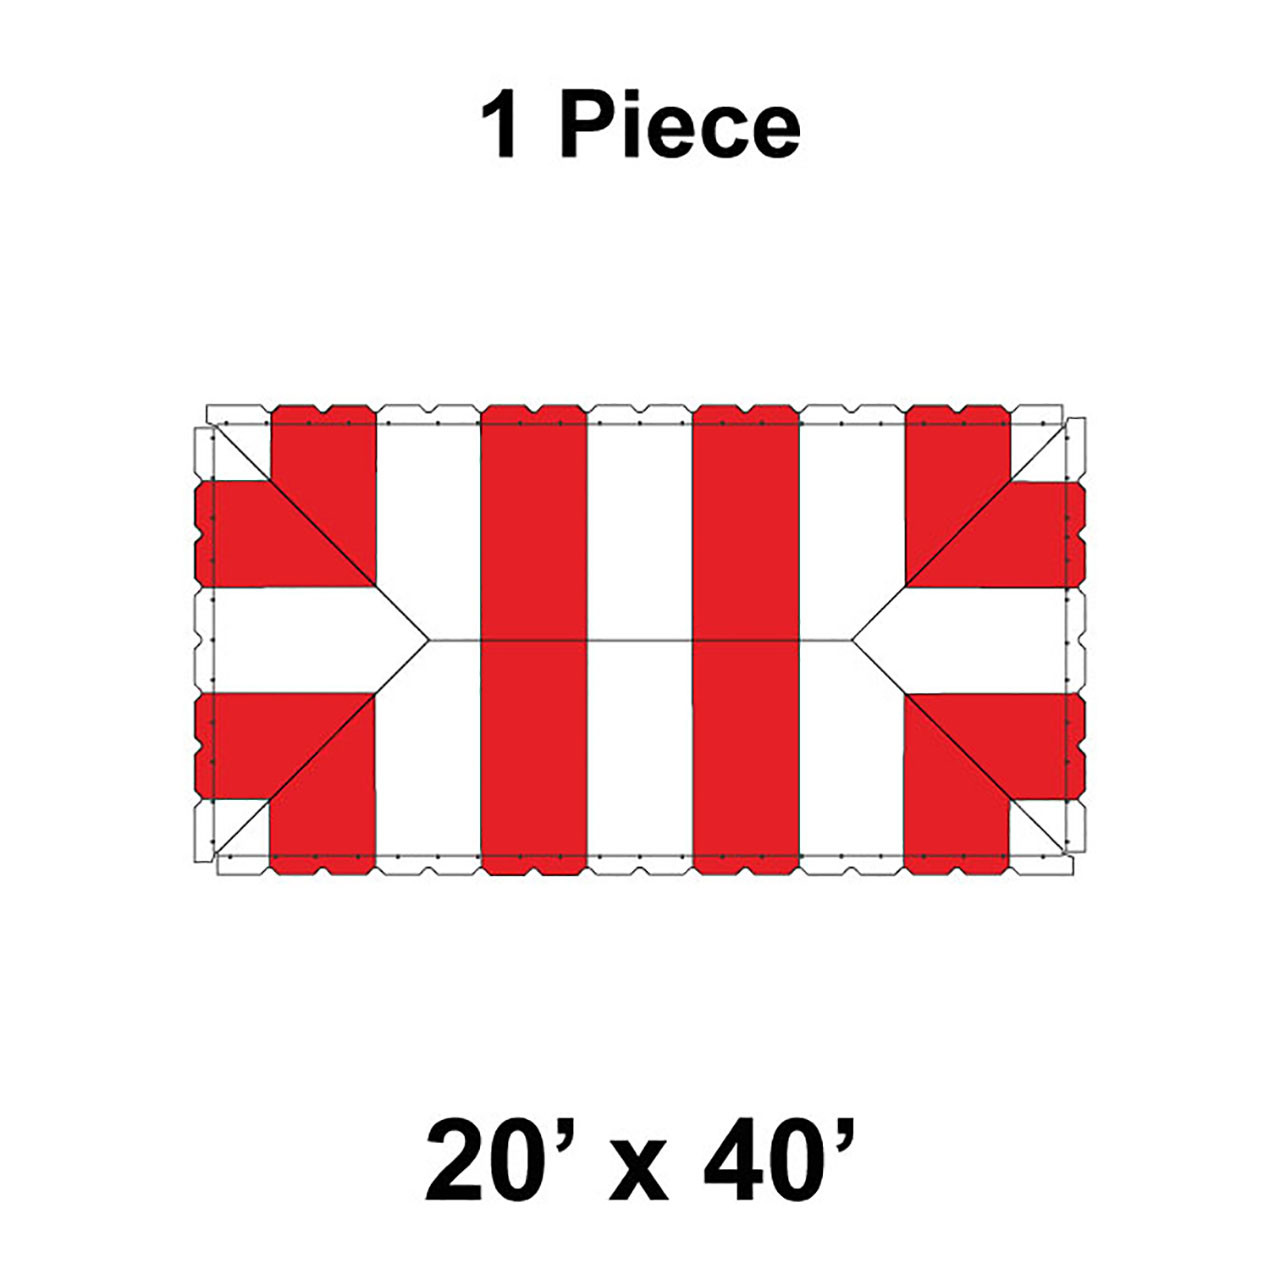 20' x 40' Classic Frame Tent, 1 Piece, 16 oz. Ratchet Top, White and Red